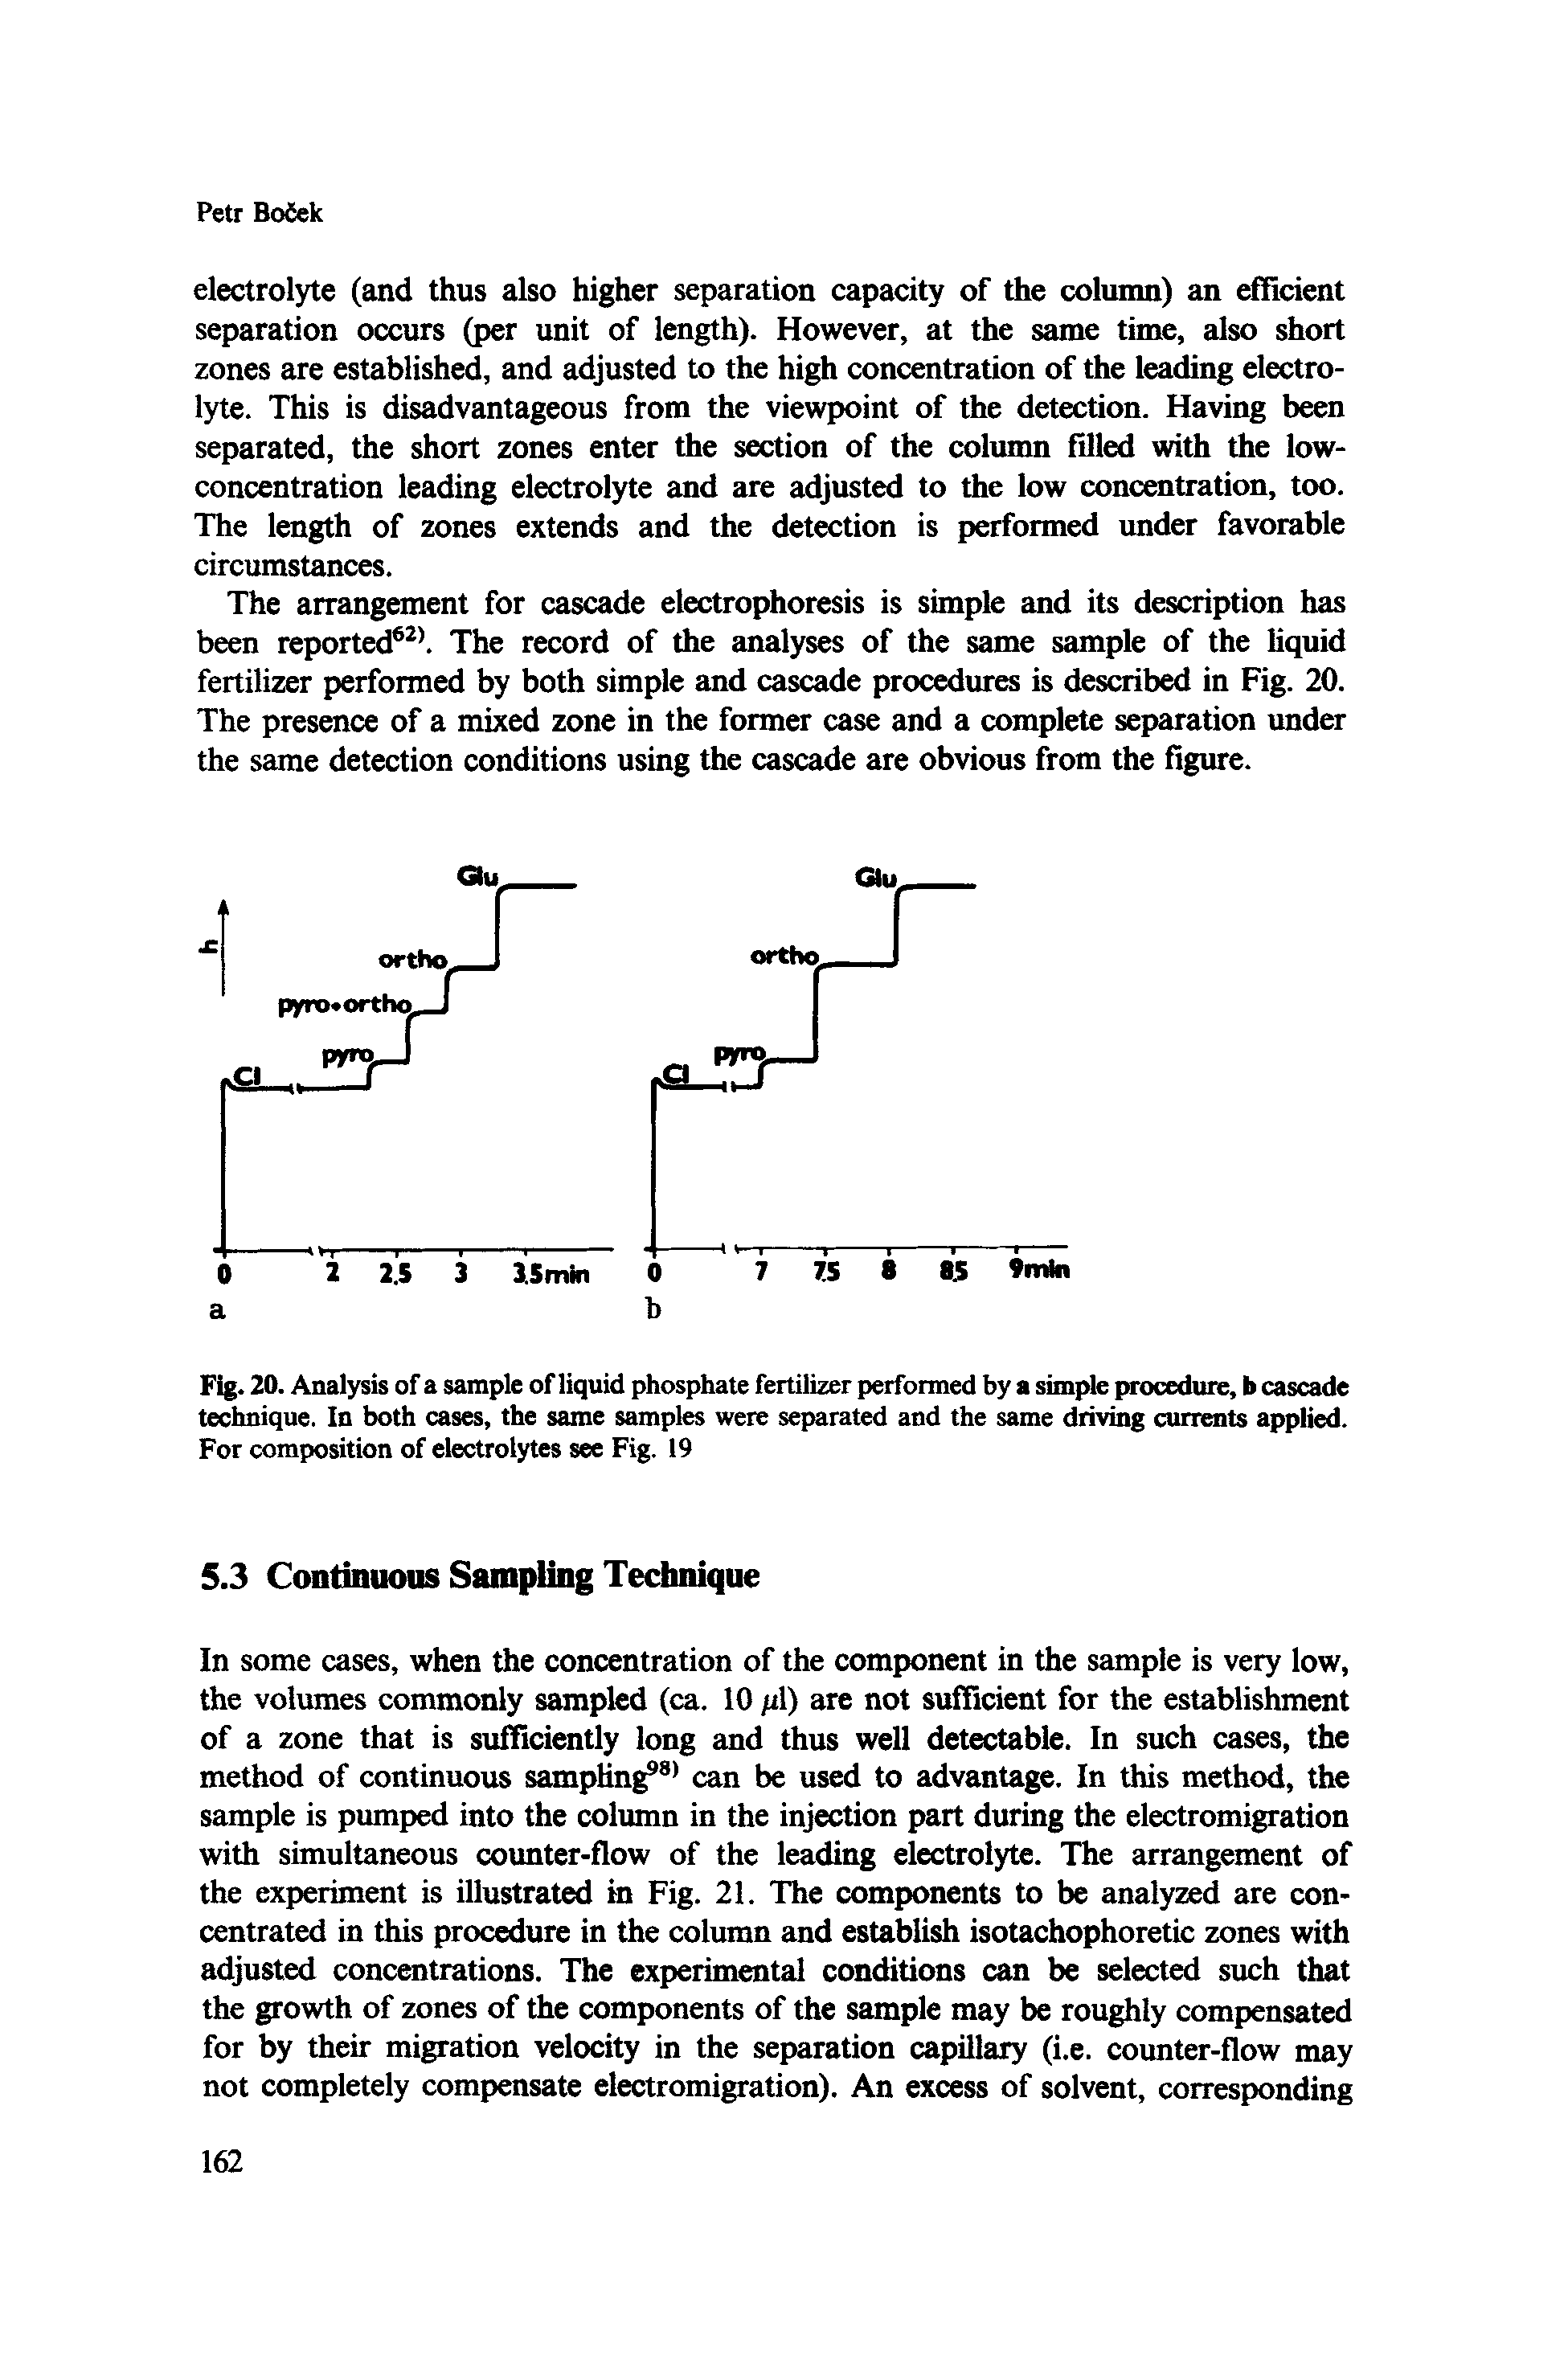 Fig. 20. Analysis of a sample of liquid phosphate fertilizer performed by a simple procedure, b cascade technique. In both cases, the same samples were separated and the same driving currents applied. For composition of electrolytes see Fig. 19...